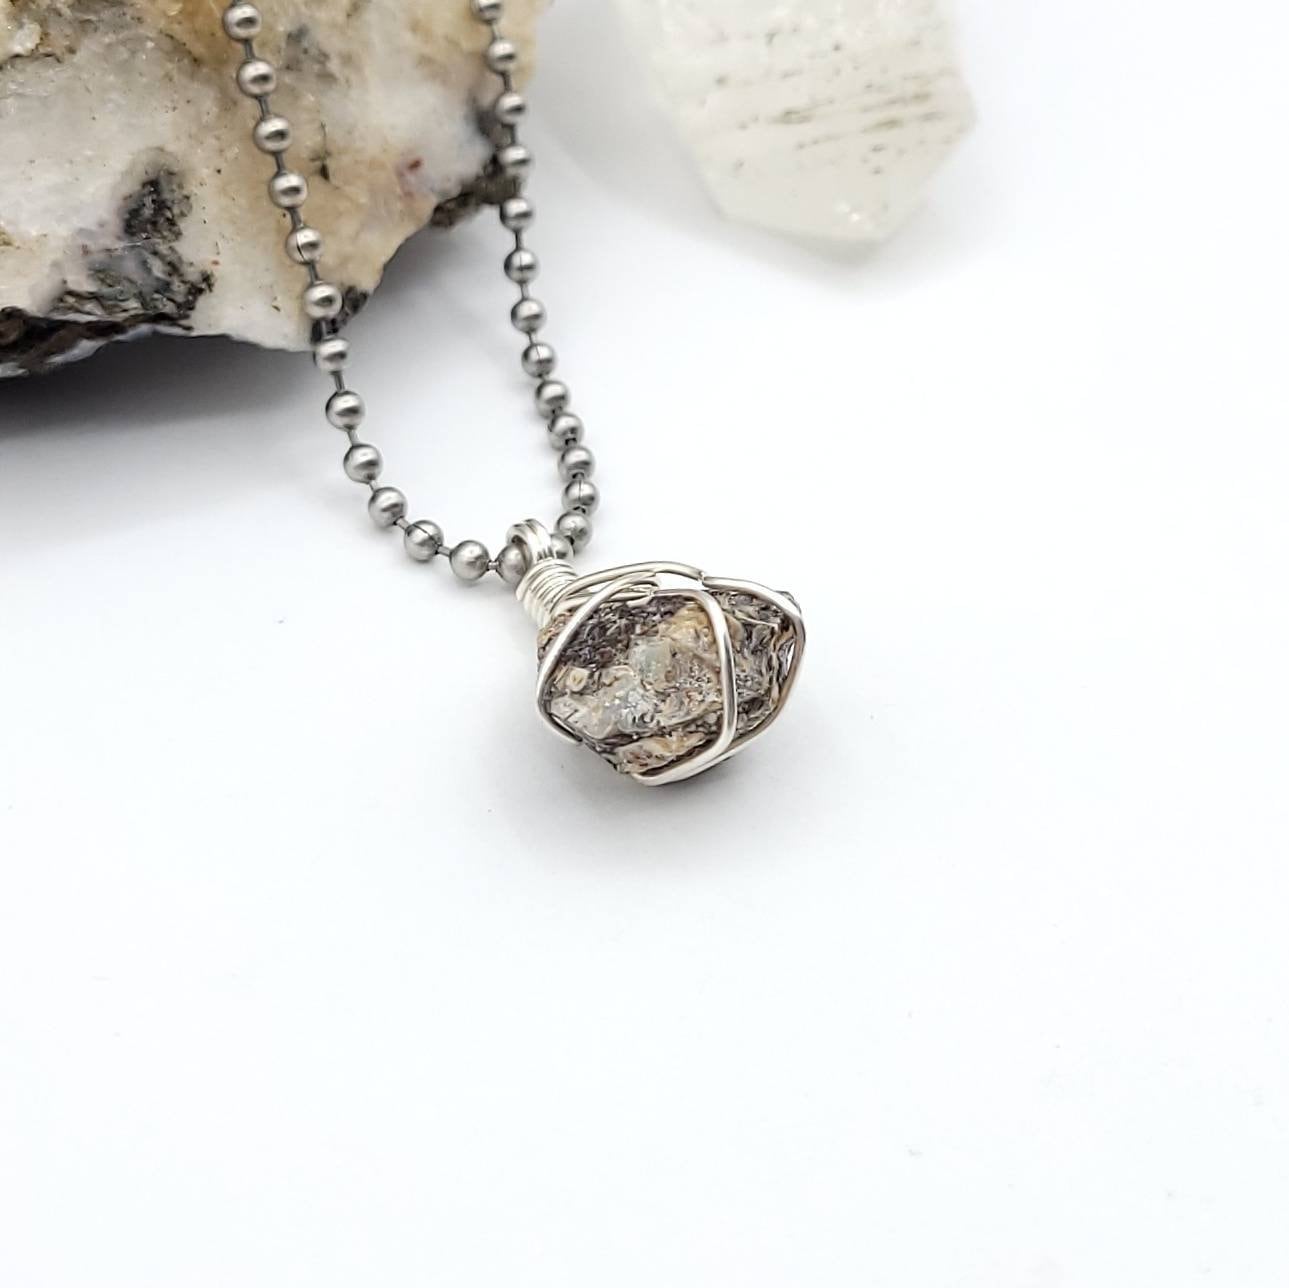 Turritella Agate Necklace, Silver Wire Wrapped Turritella Pendant | Promotes Strength, Protection, Energizing and Cleansing